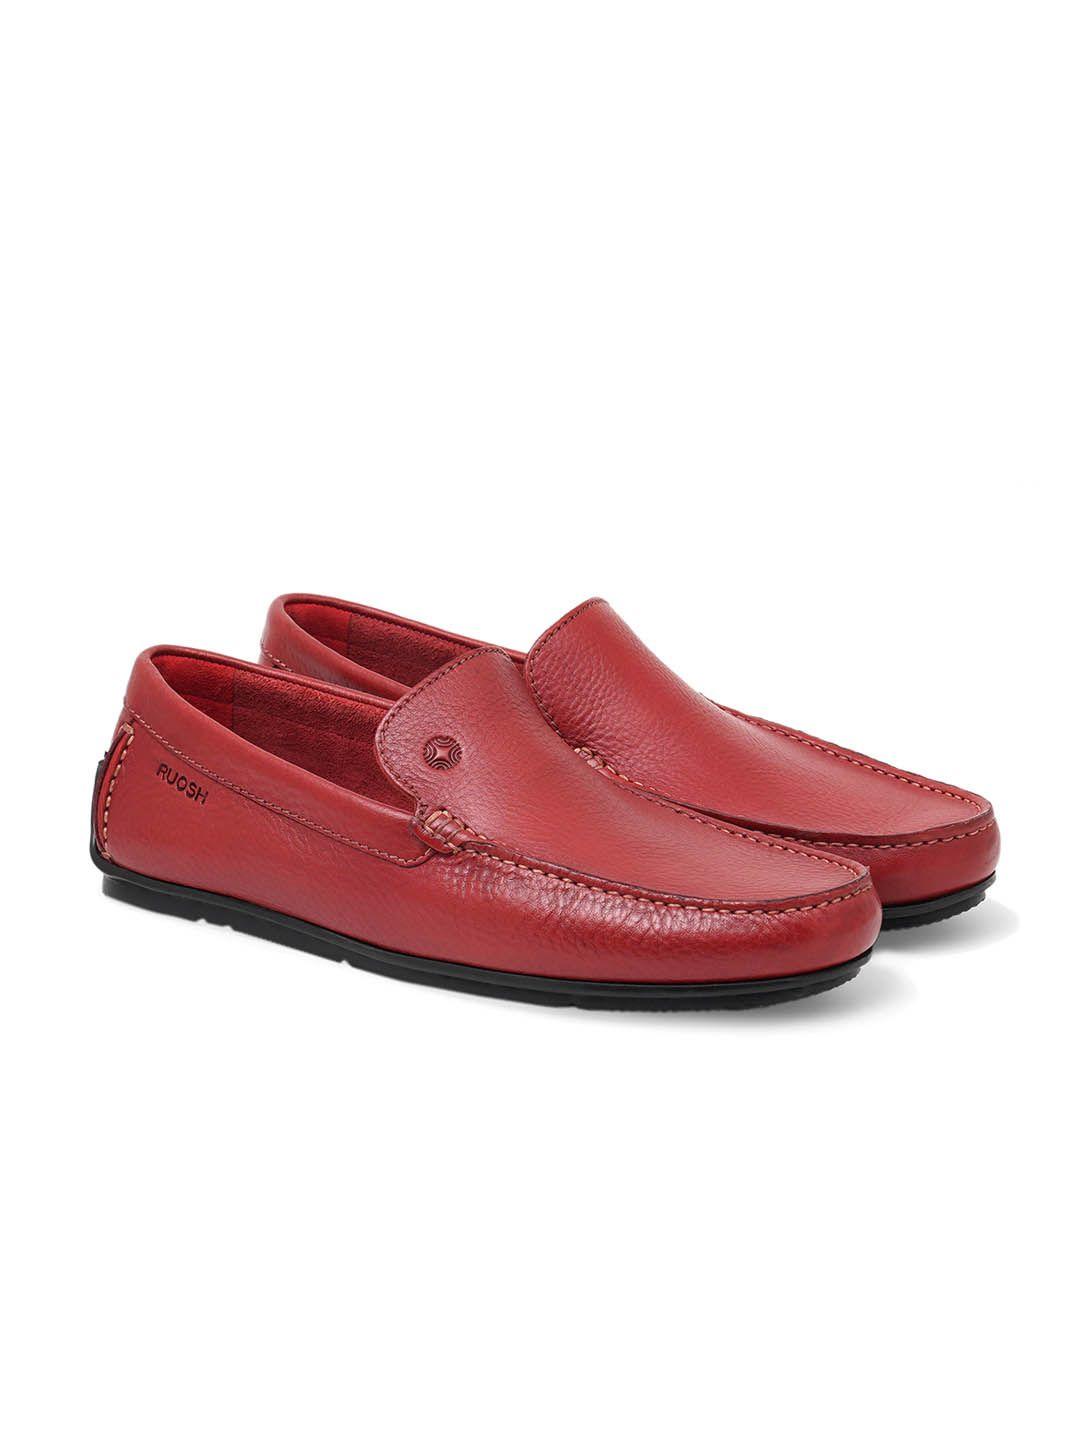 ruosh-men-red-textured-leather-loafers